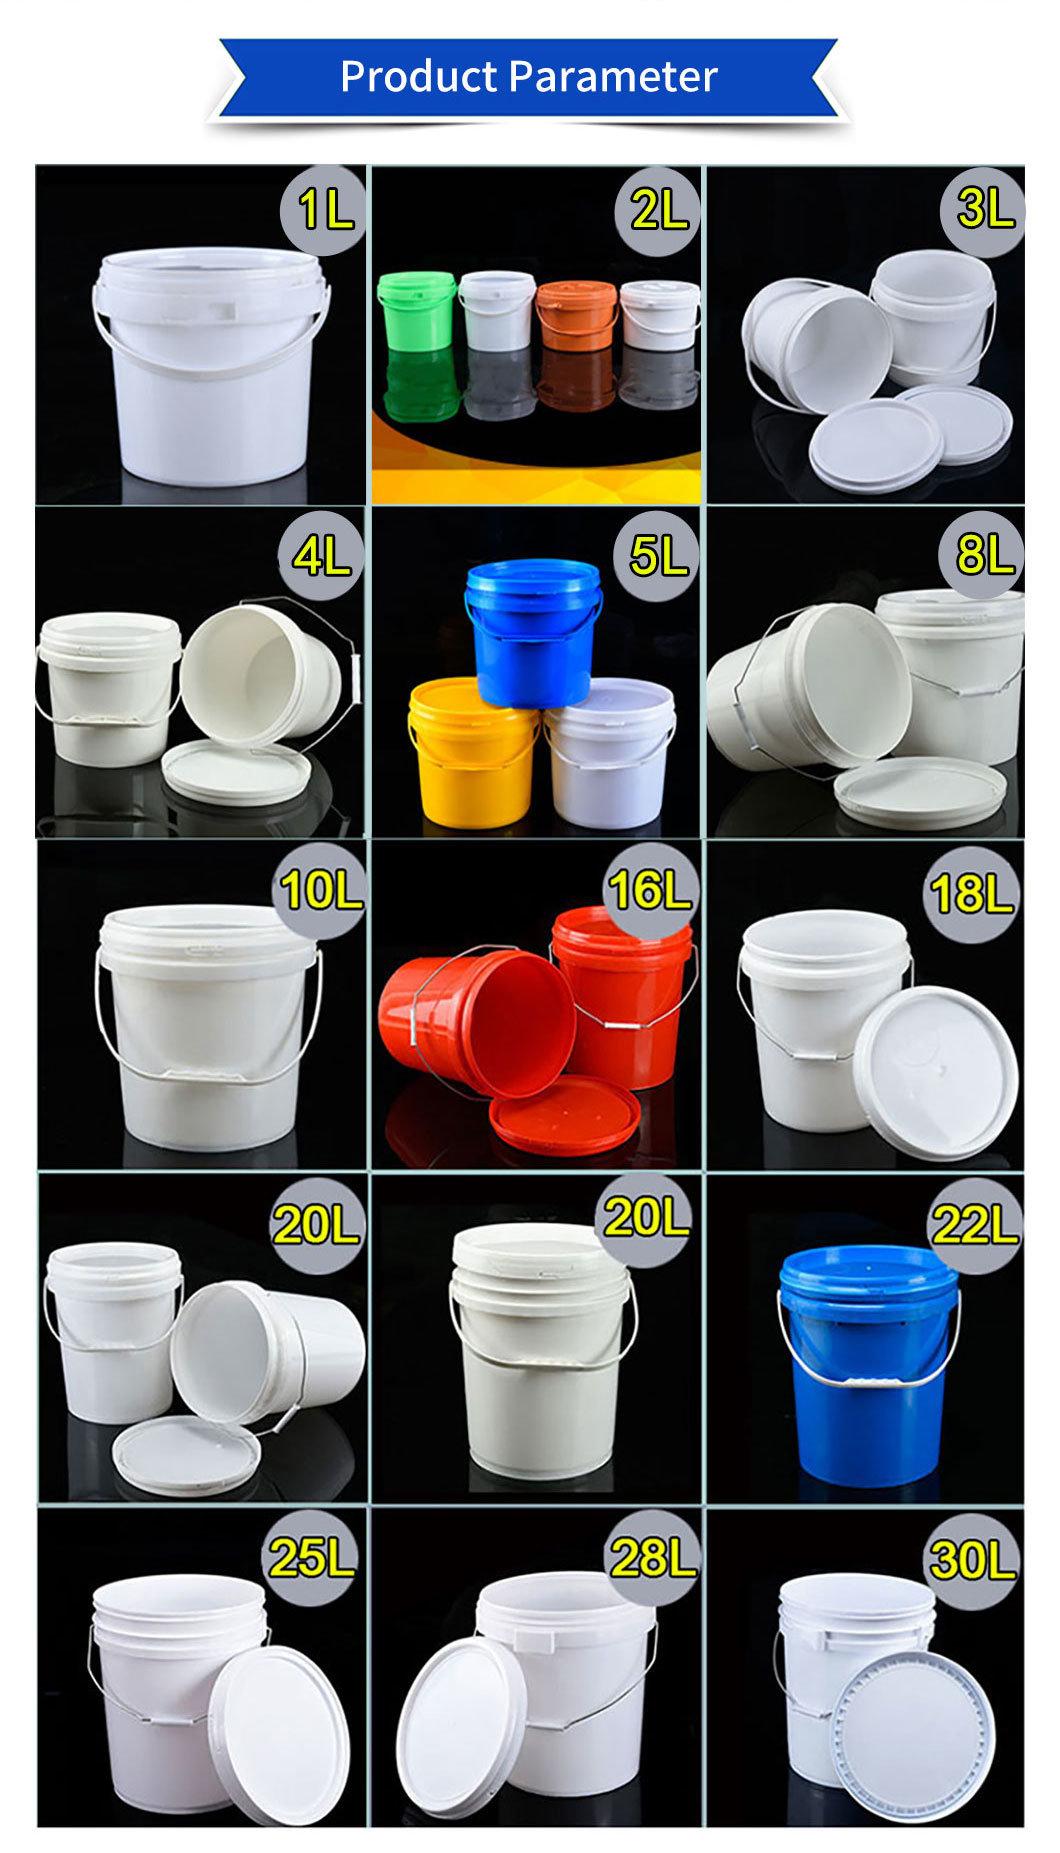 20L Soybean Oil Plastic Bucket with Leakproof Lid Pouring Spout